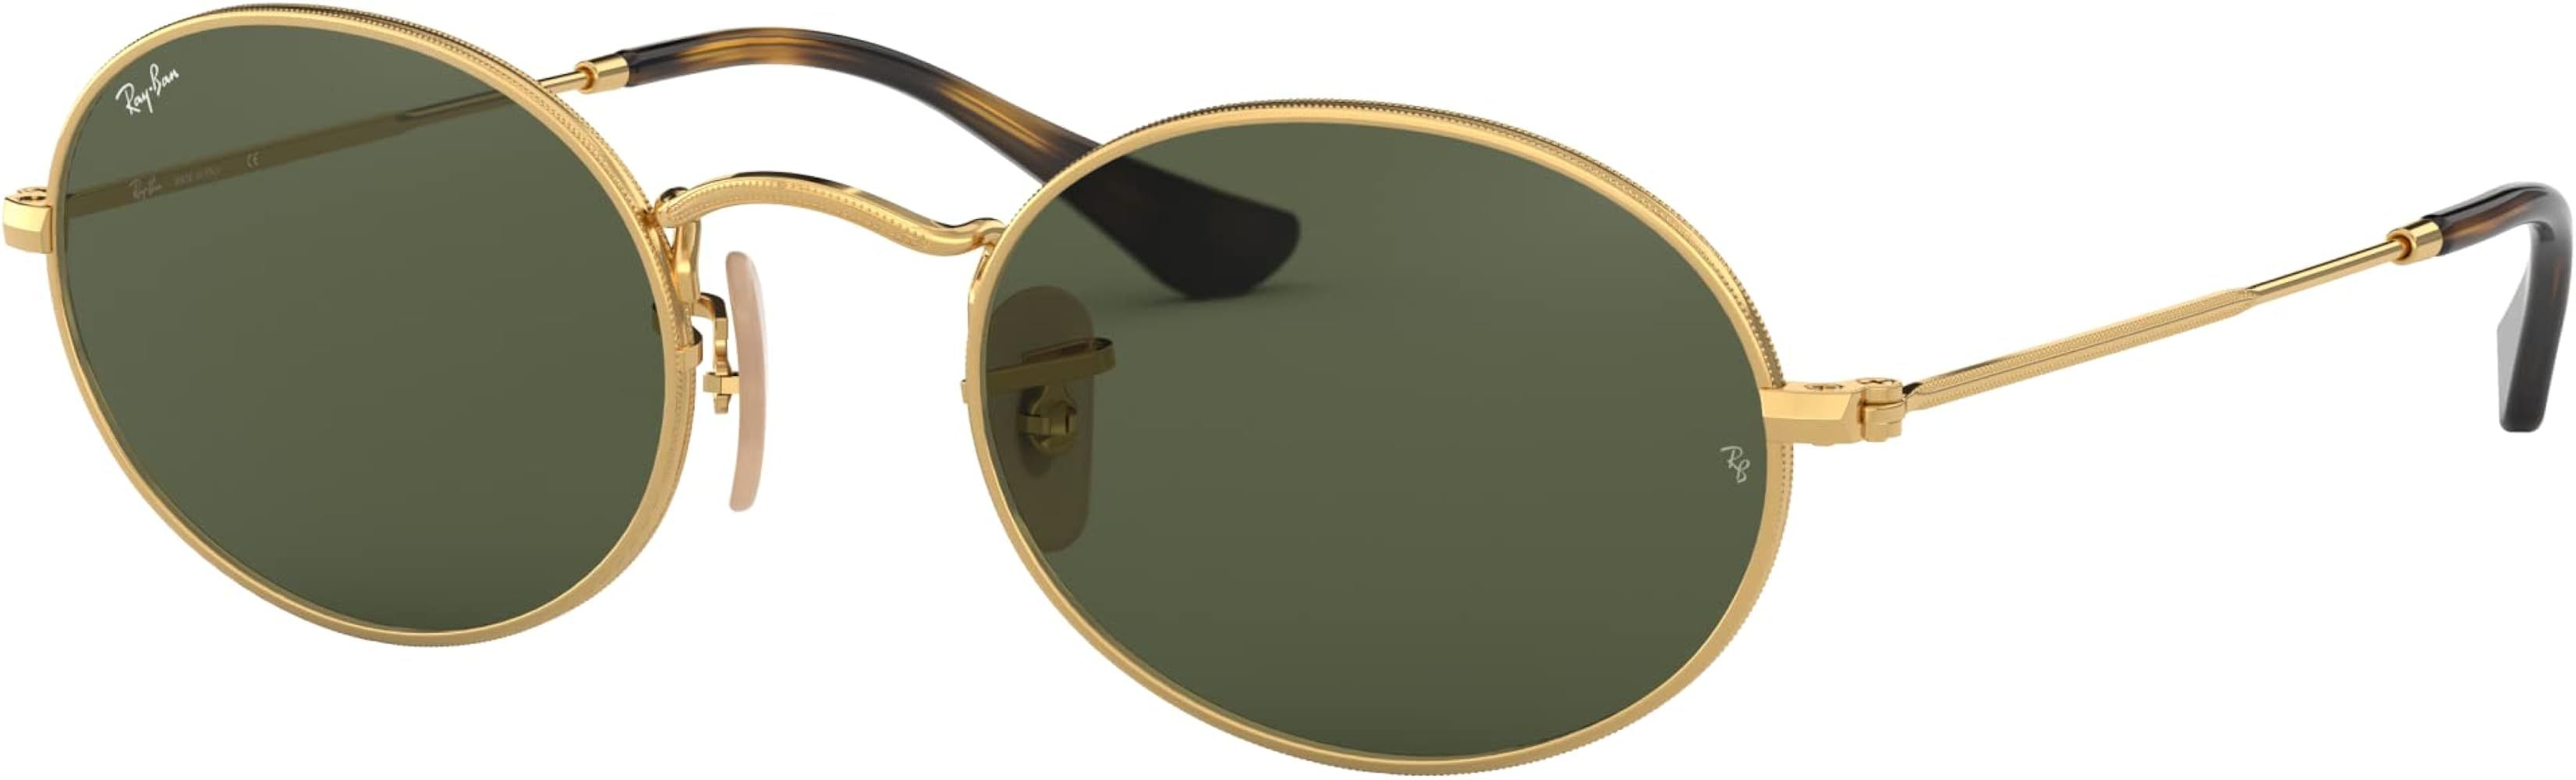 Ray-Ban Small Metal Oval Sunglasses in Gold Green RB3547N 001 51 | Amazon (UK)